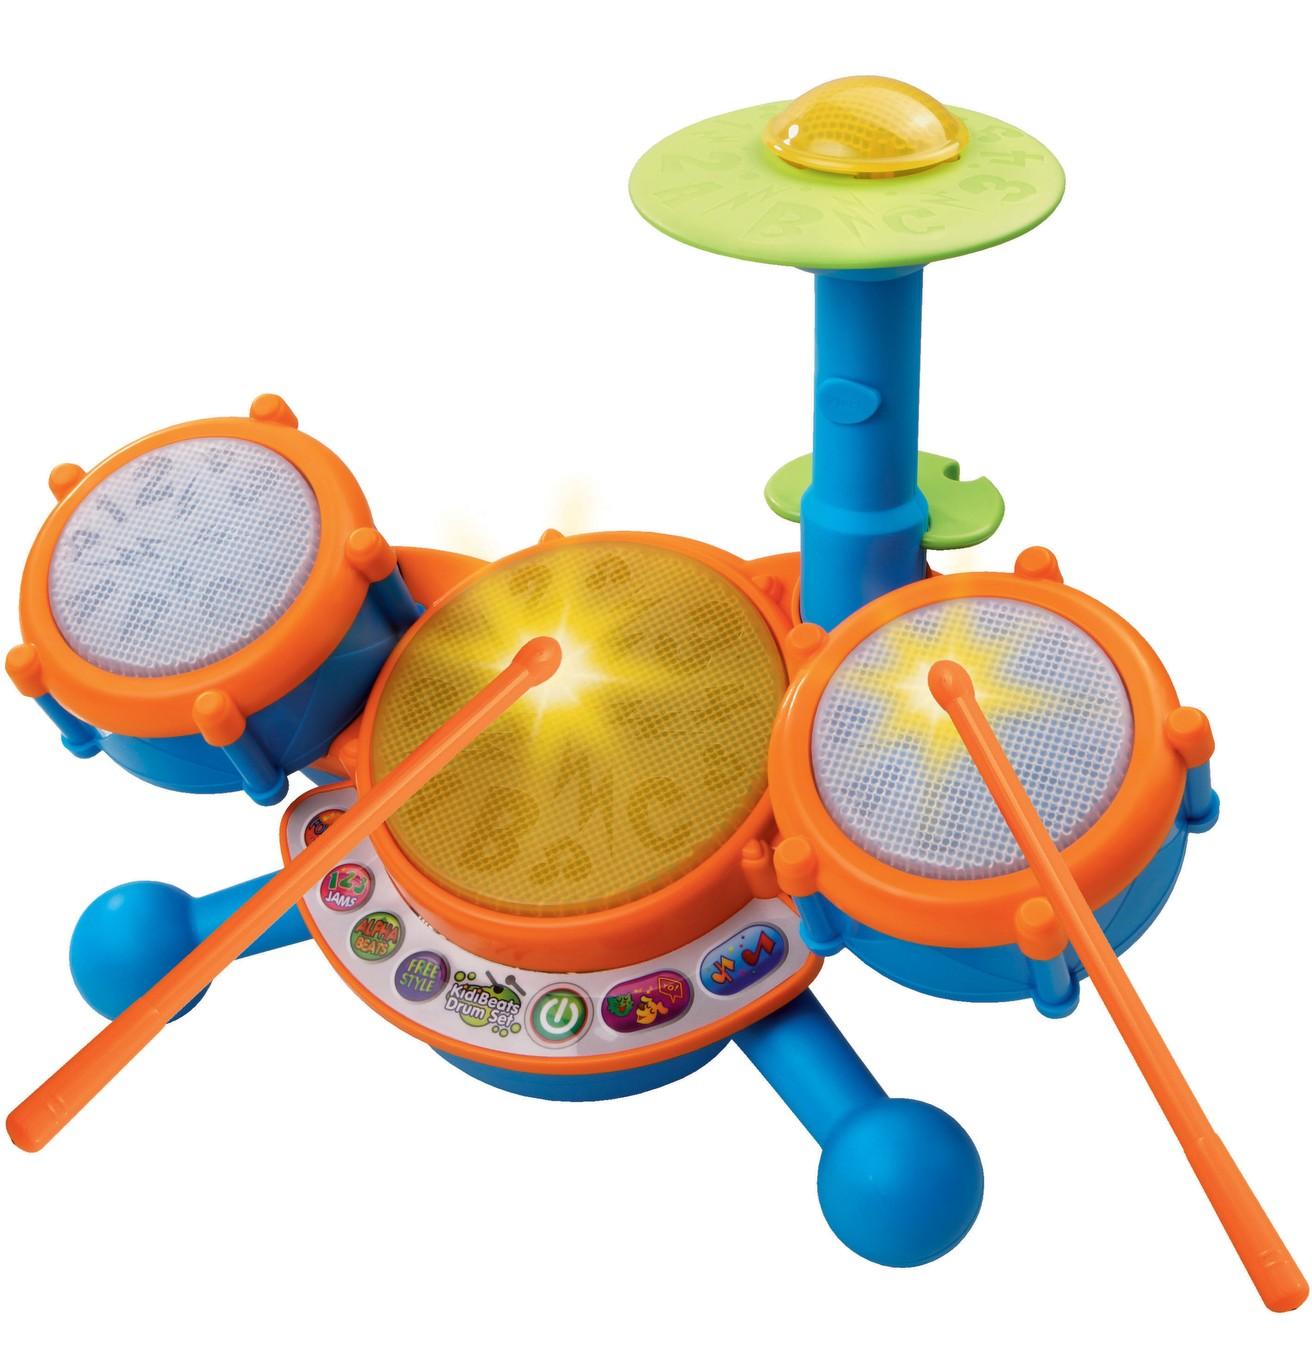 9 in 1 Kids Drum Kit Play Set Baby Toddlers Musical Toy Instrument w/ Microphone 